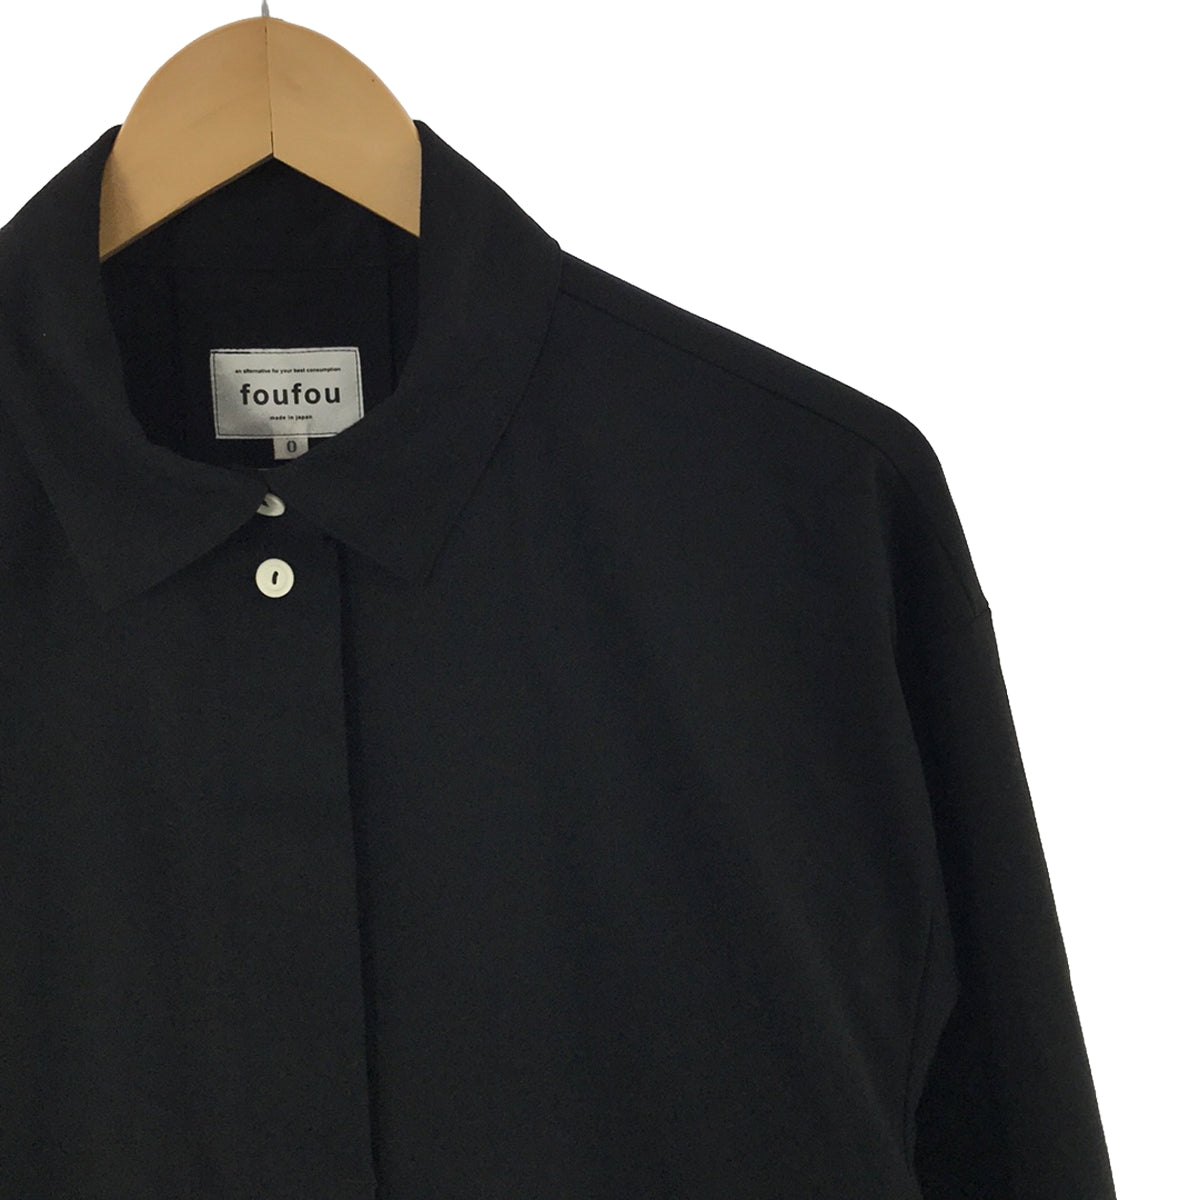 foufou / フーフー | THE DRESS #03 belted rendezvous shirts one